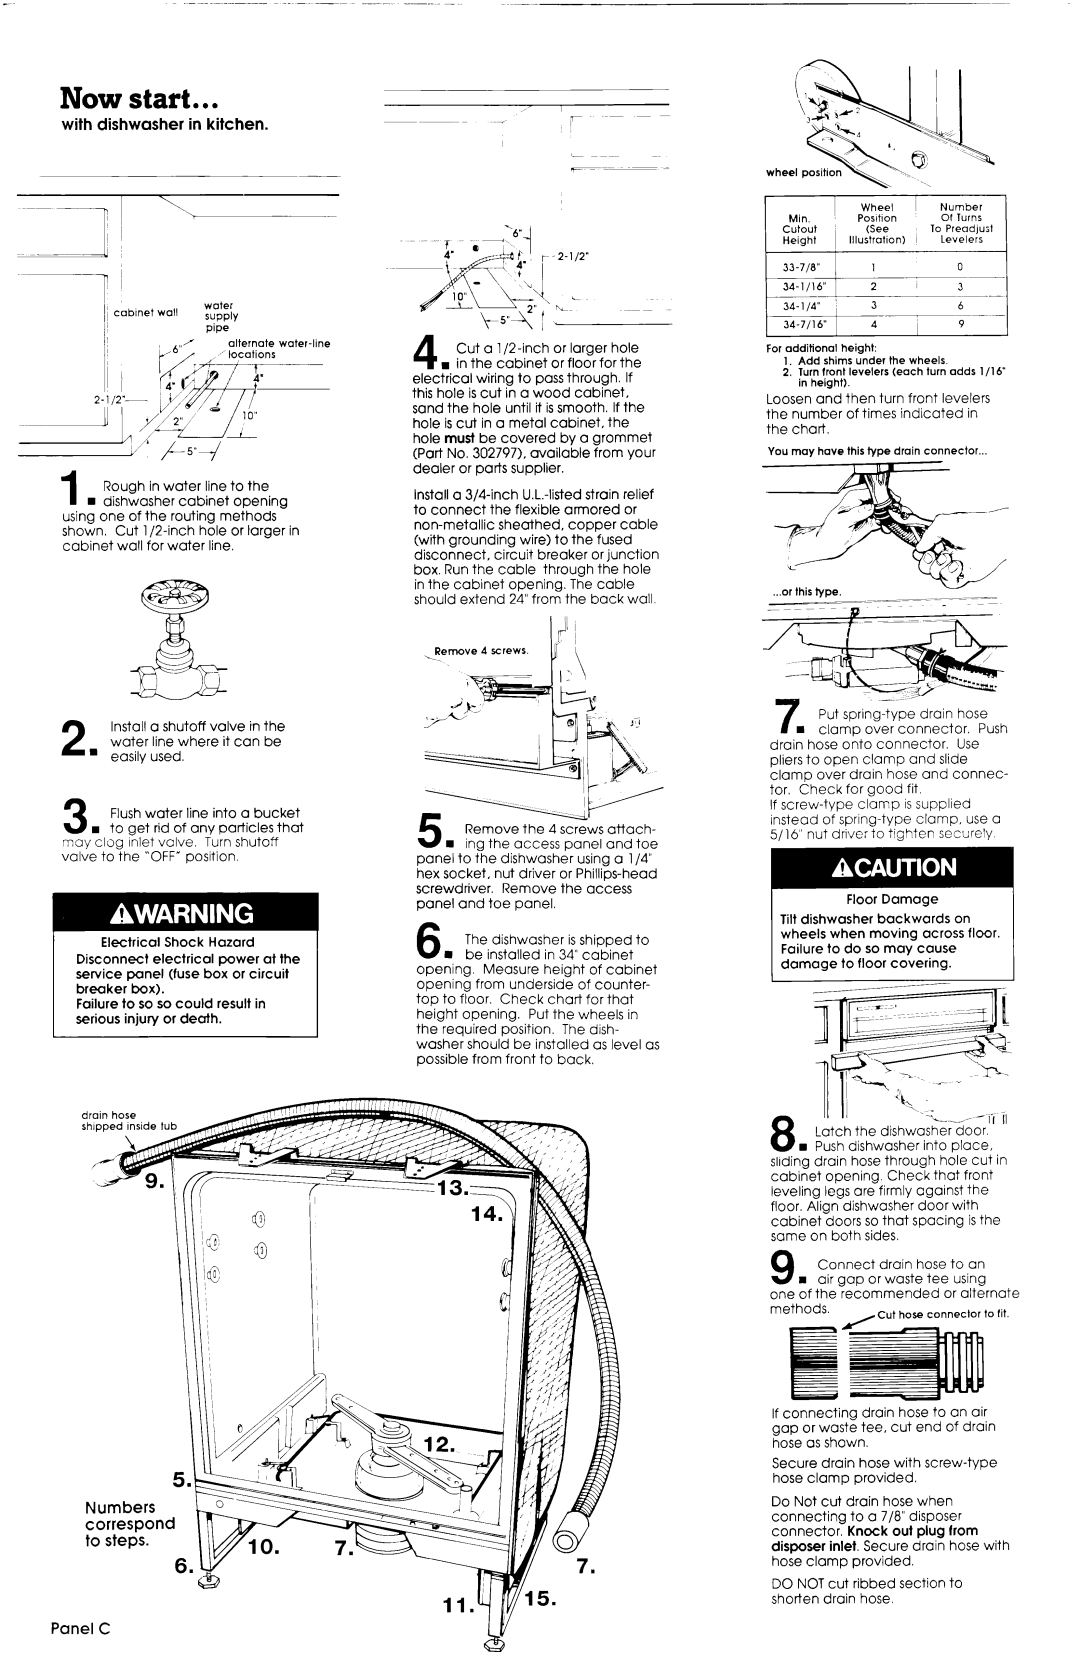 Whirlpool 3369089 installation instructions Now start, with dishwasher in kitchen, v +5’*+, Panel C 